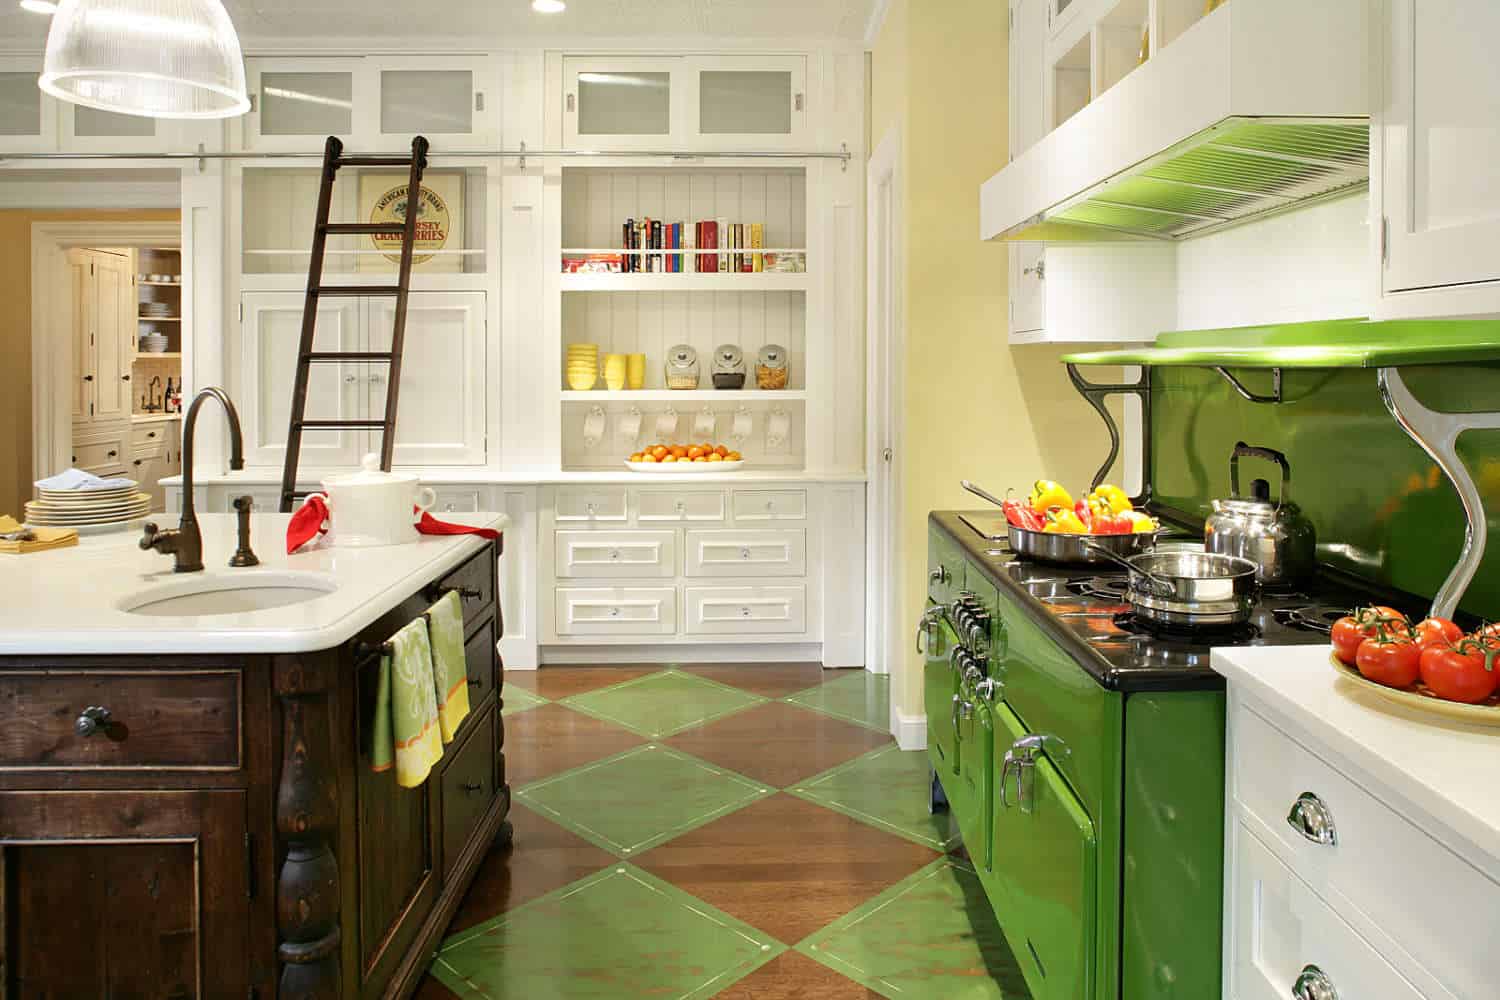 Classic White & Wood Bilotta Kitchen with green and yellow accents